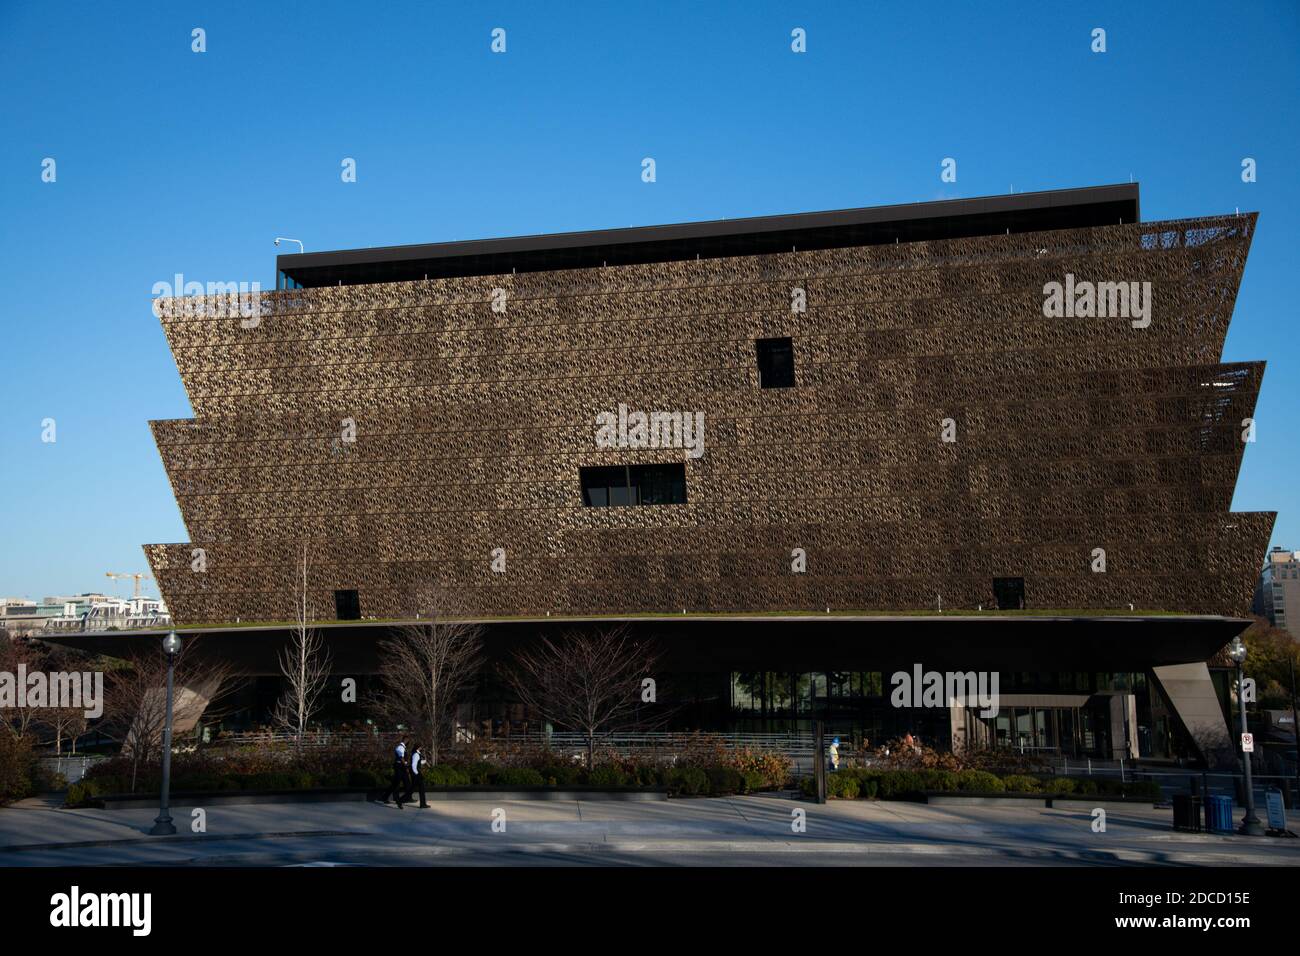 Washington, USA. 20th Nov, 2020. A general view of the National Museum of African American History and Culture (NMAAHC), a Smithsonian Institution, in Washington, DC, on November 20, 2020, amid the coronavirus pandemic. As confirmed COVID-19 case counts soar across the country, Smithsonian Institutions in Washington announced they would be closing again starting next week. (Graeme Sloan/Sipa USA) Credit: Sipa USA/Alamy Live News Stock Photo